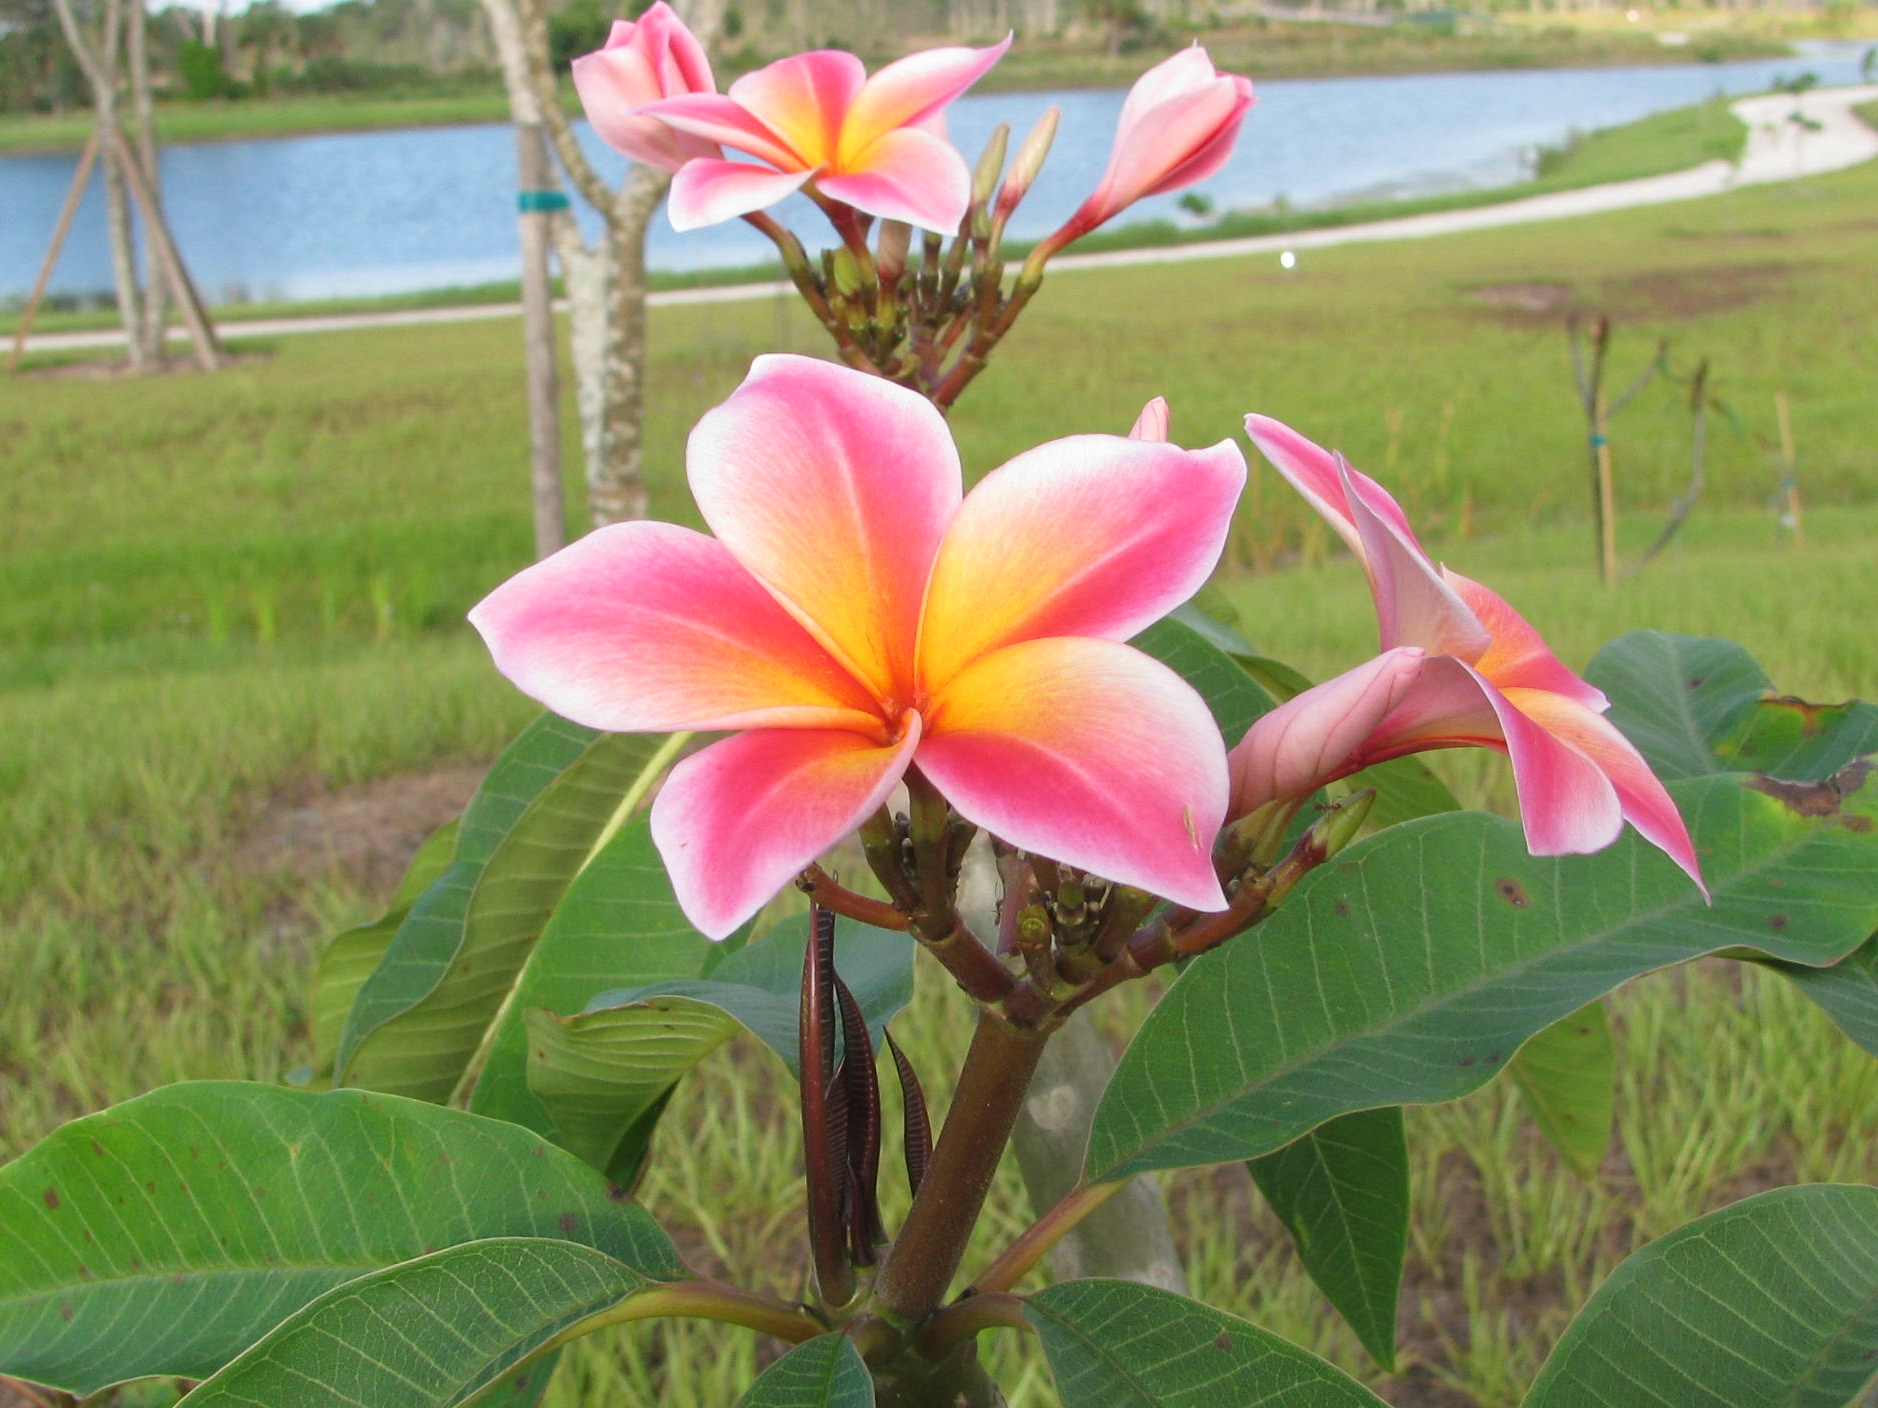 Nationally Accredited Plumeria CollectionTM at Naples Botanical Garden.